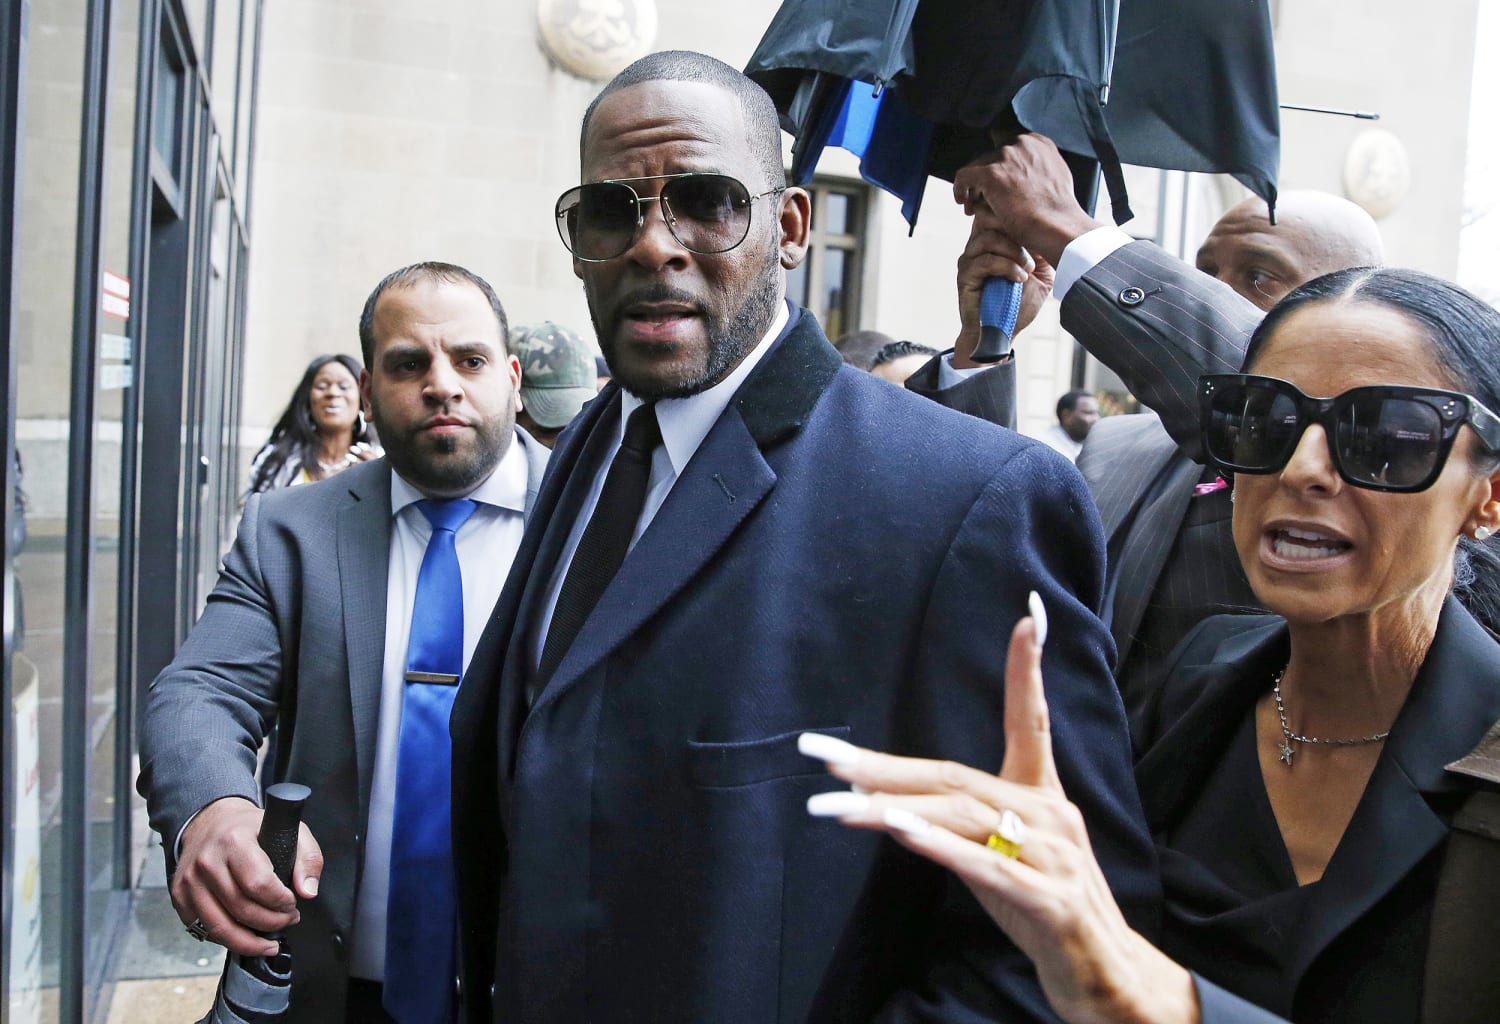 R. Kelly arrested on federal sex crime charges out of Chicago, New York